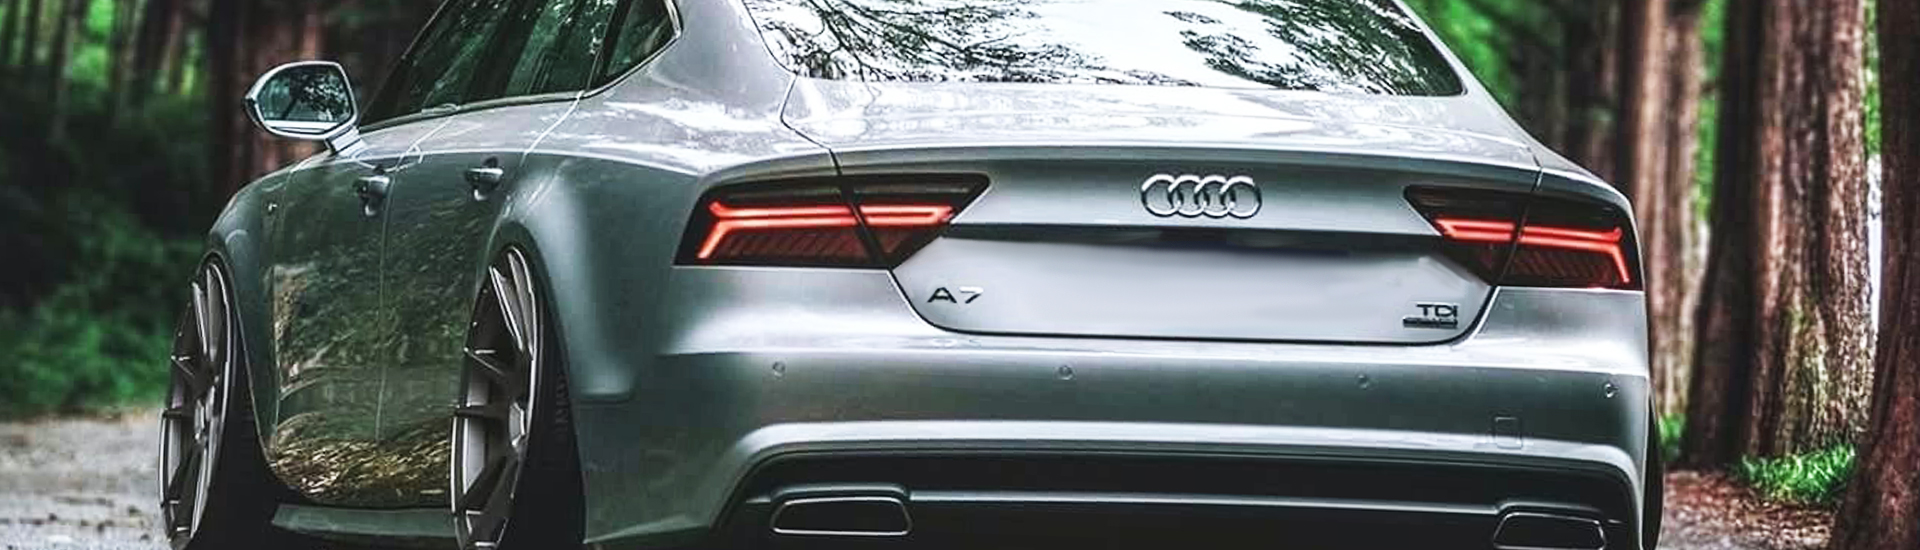 Audi A7 Tail Light Tint Covers